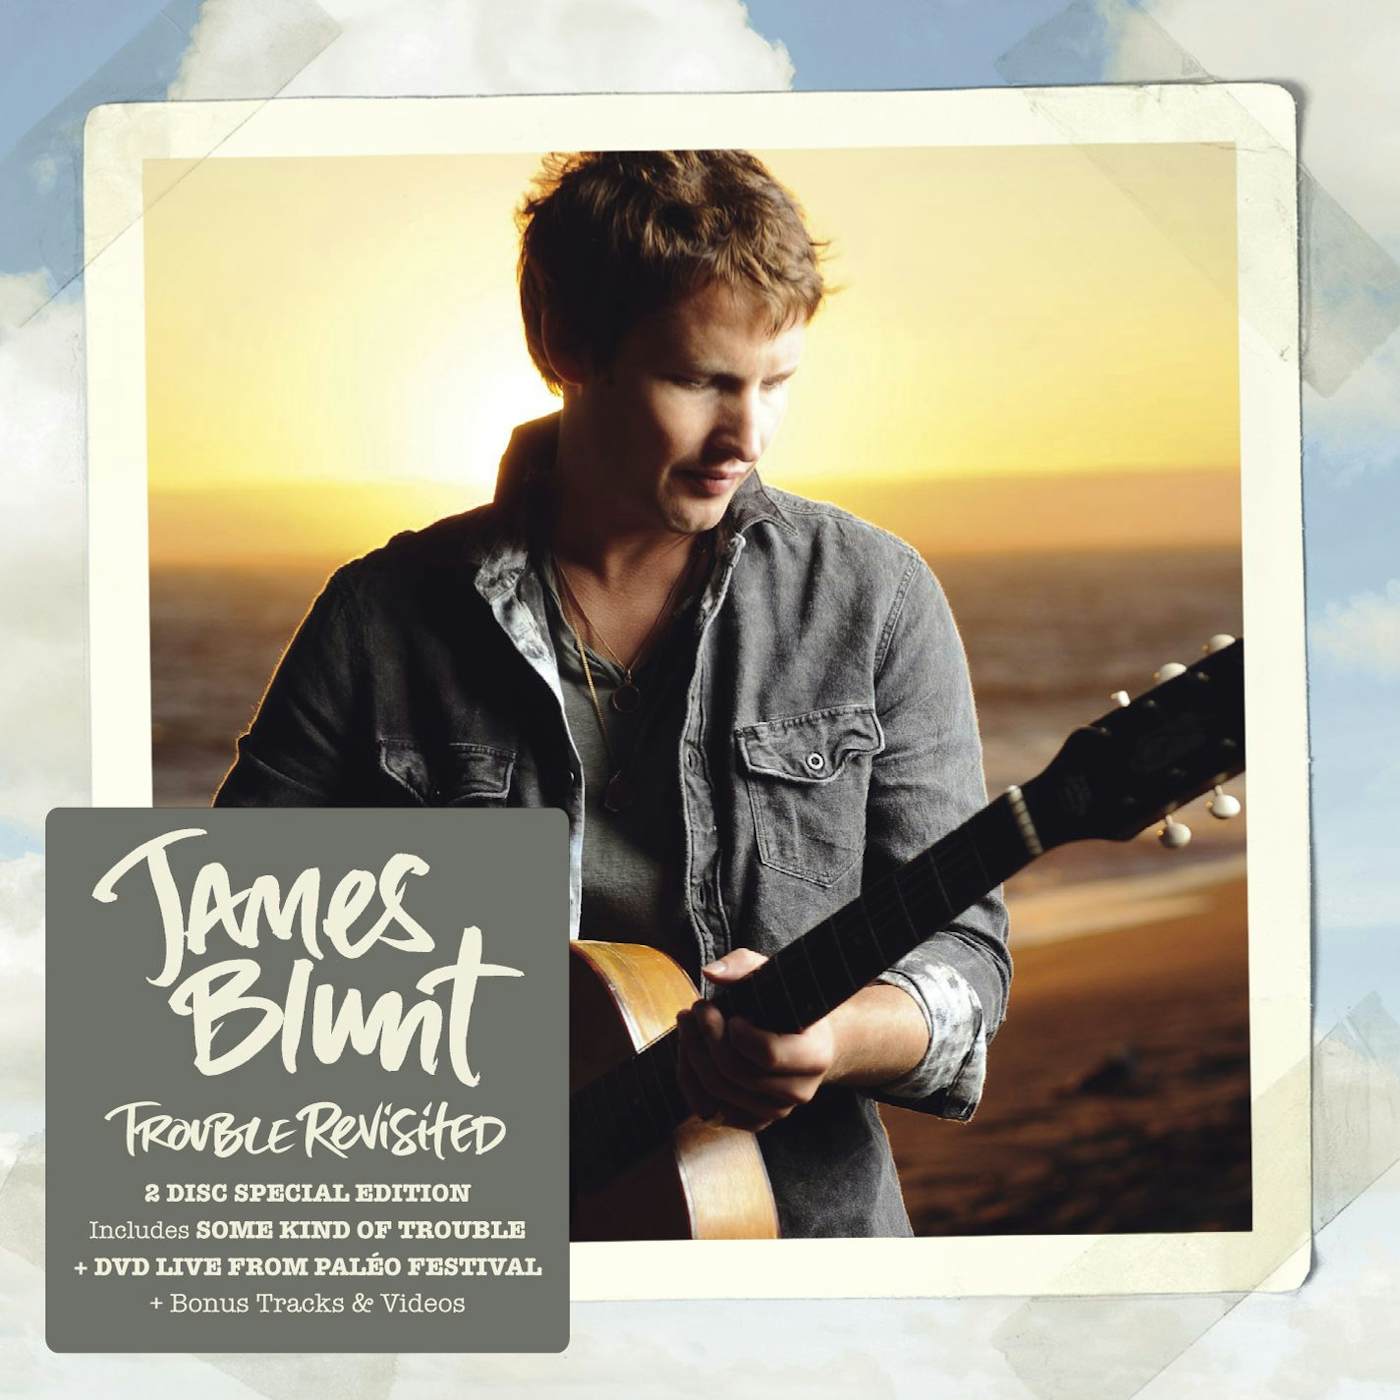 James Blunt TROUBLE REVISITED CD